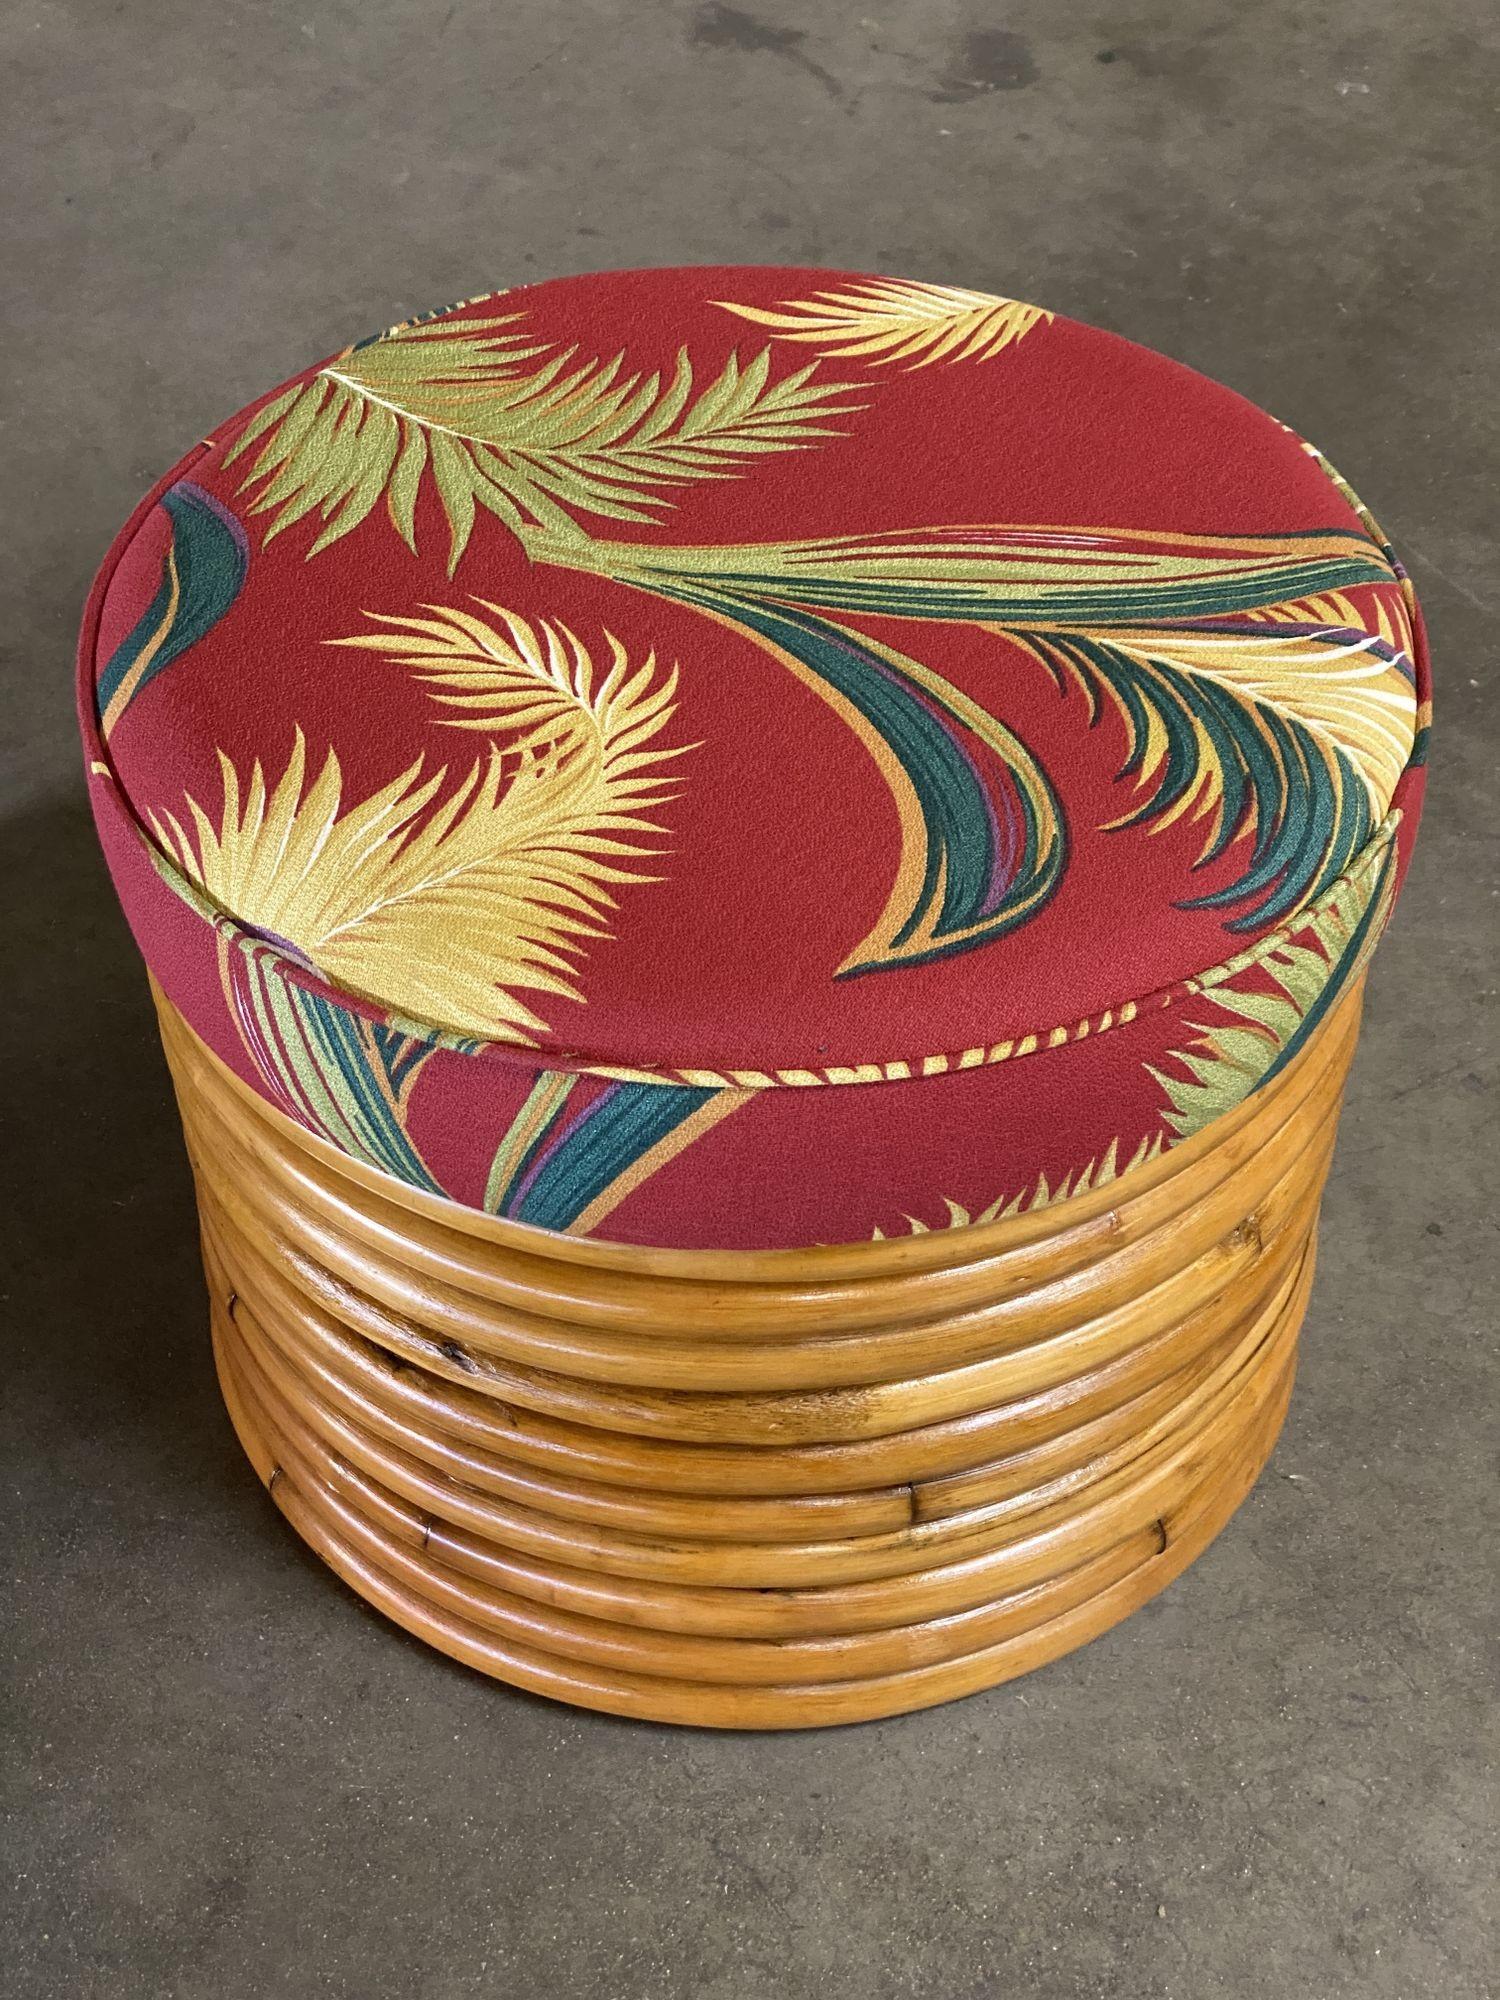 American Restored Round Stacked Rattan Ottoman Stool with Bark Cloth Covering